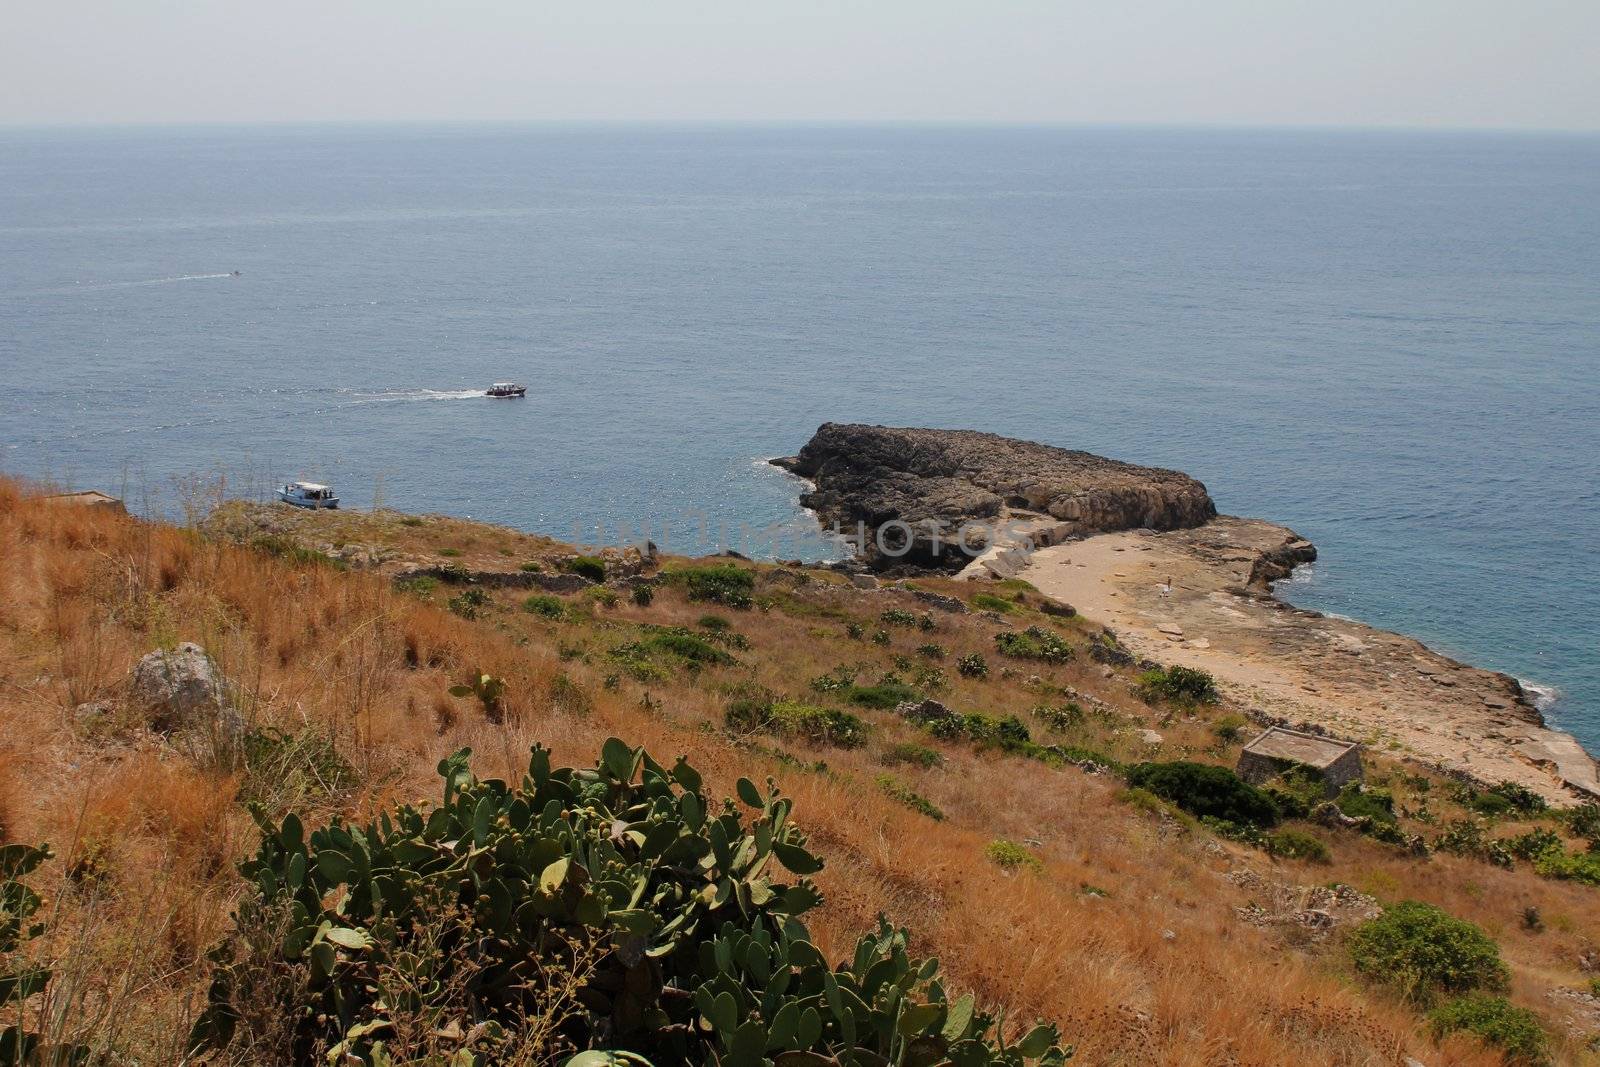 Punta Meliso promontory, in Santa Maria di Leuca, the southeastern extremity of Italy, as well as meeting point of the Adriatic Sea and the Ionian Sea
